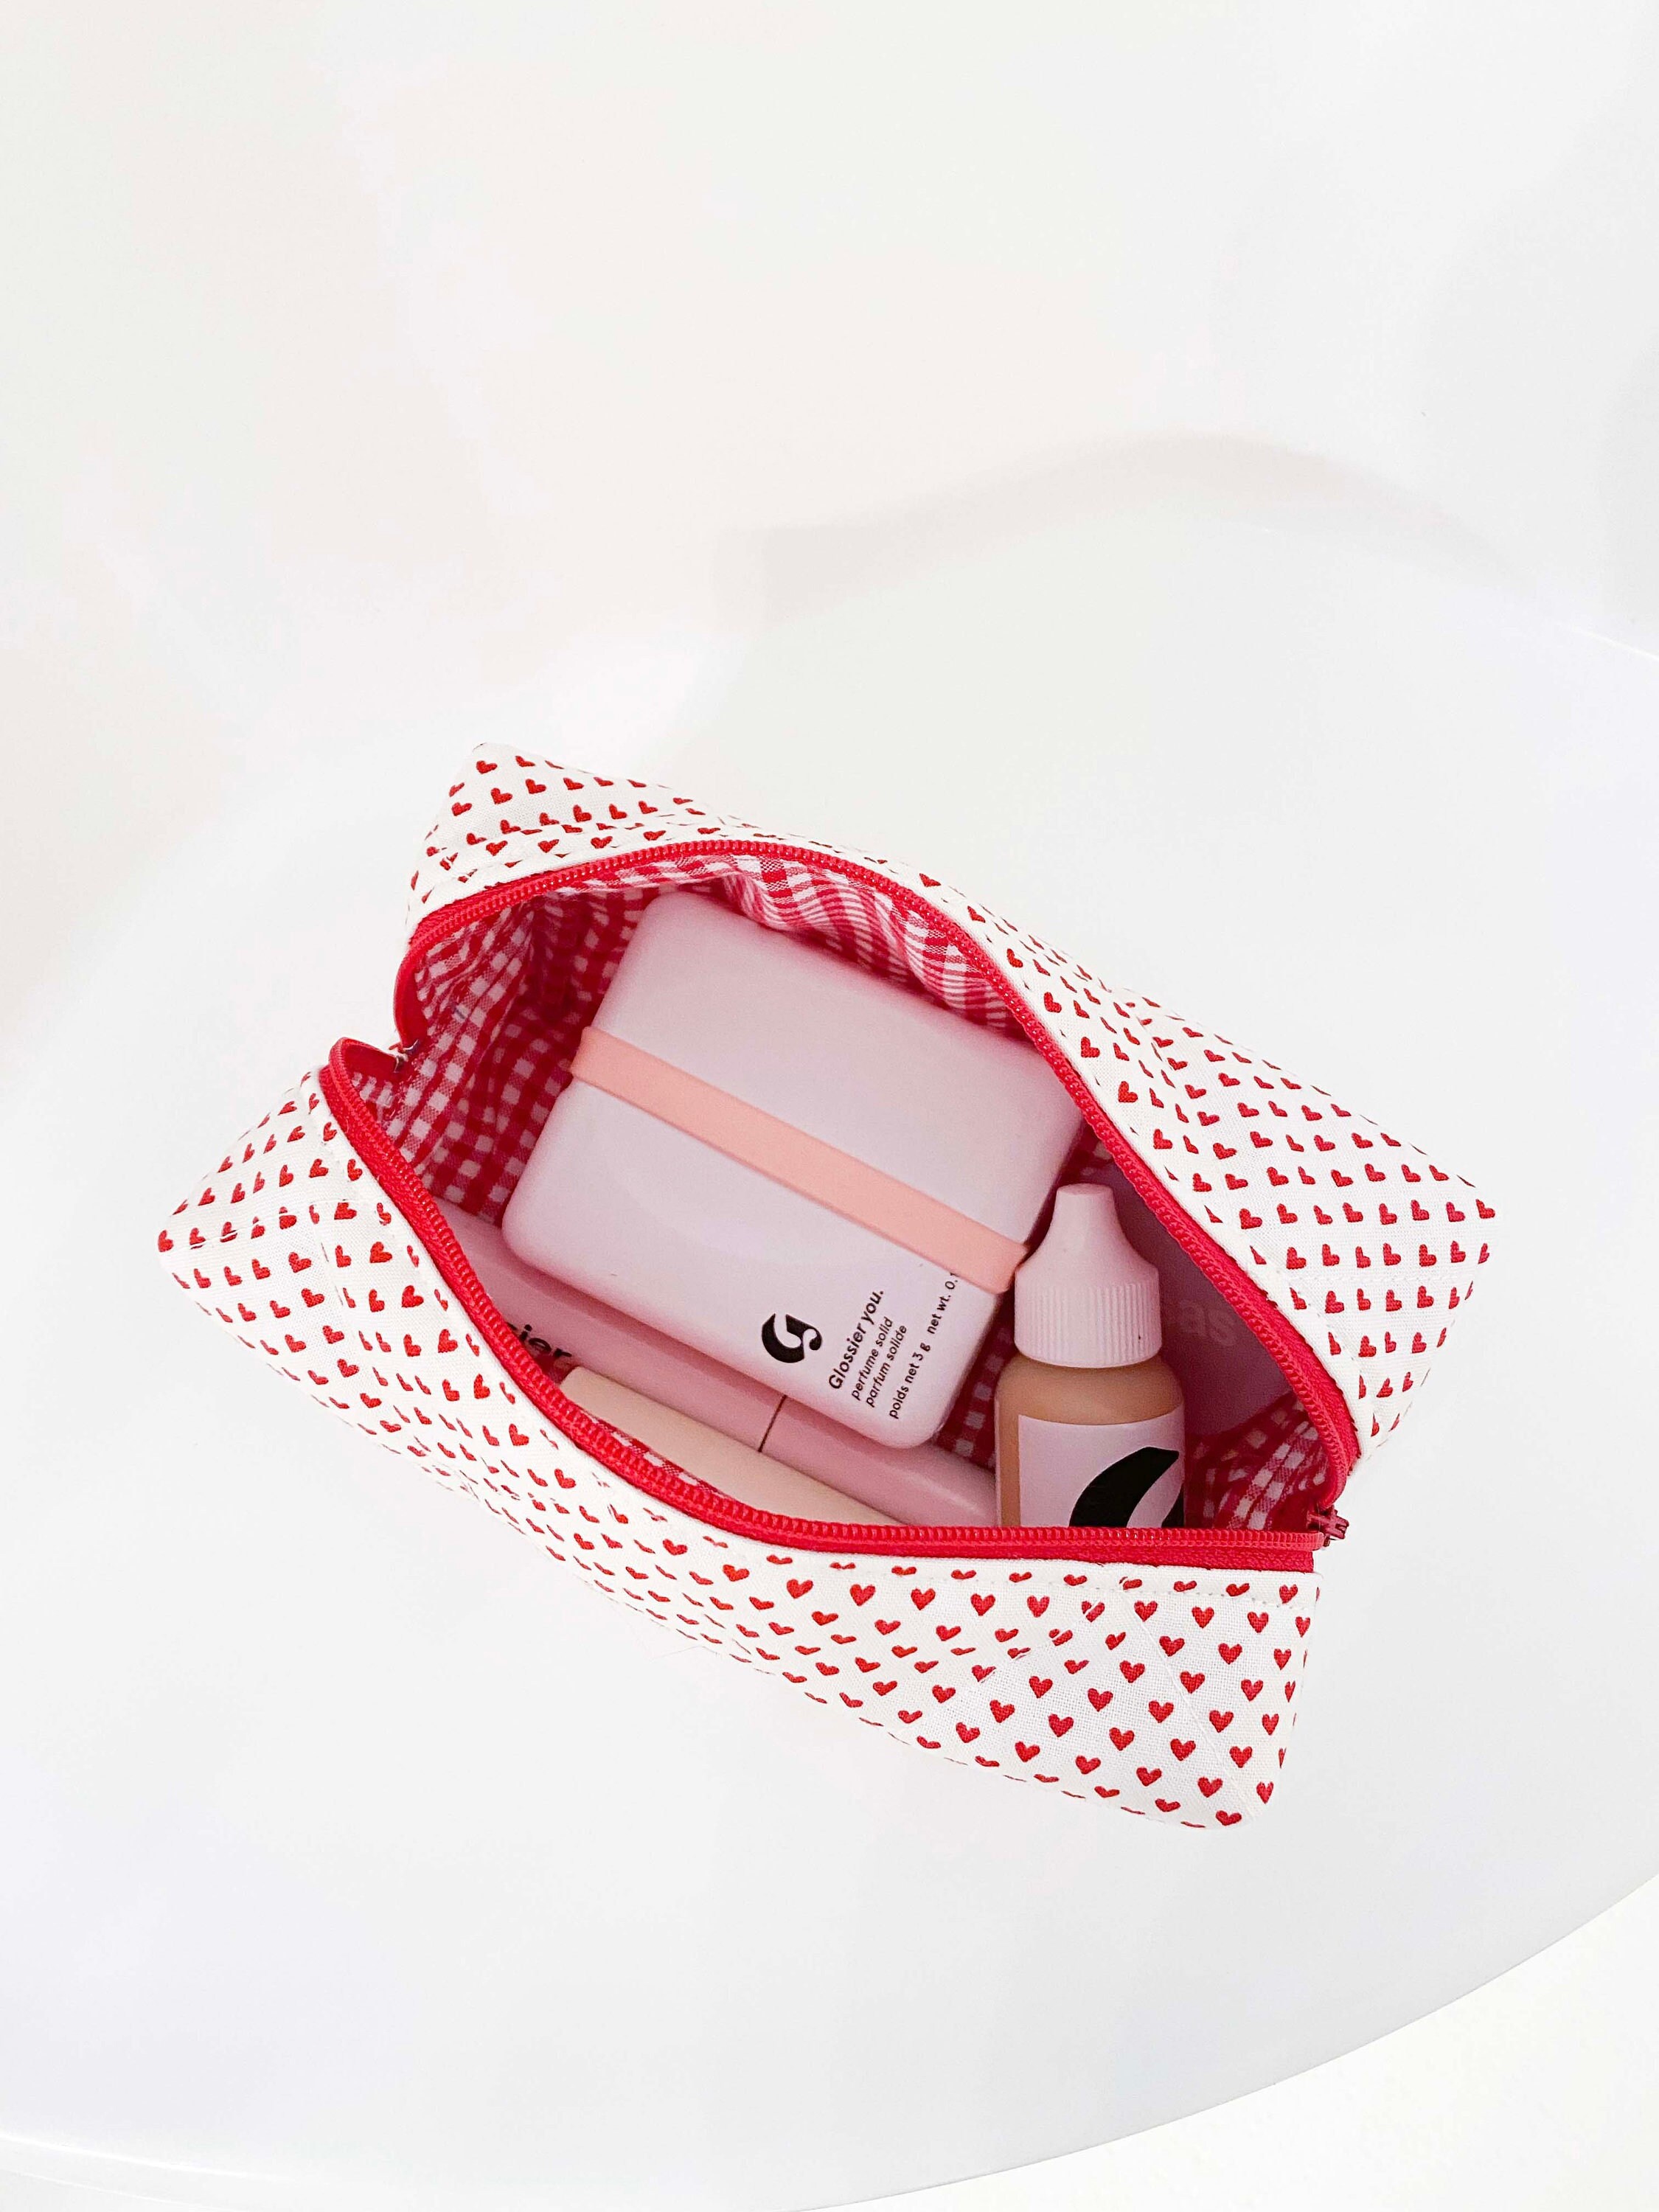 Coquette beauty essentials to add to your make-up bag